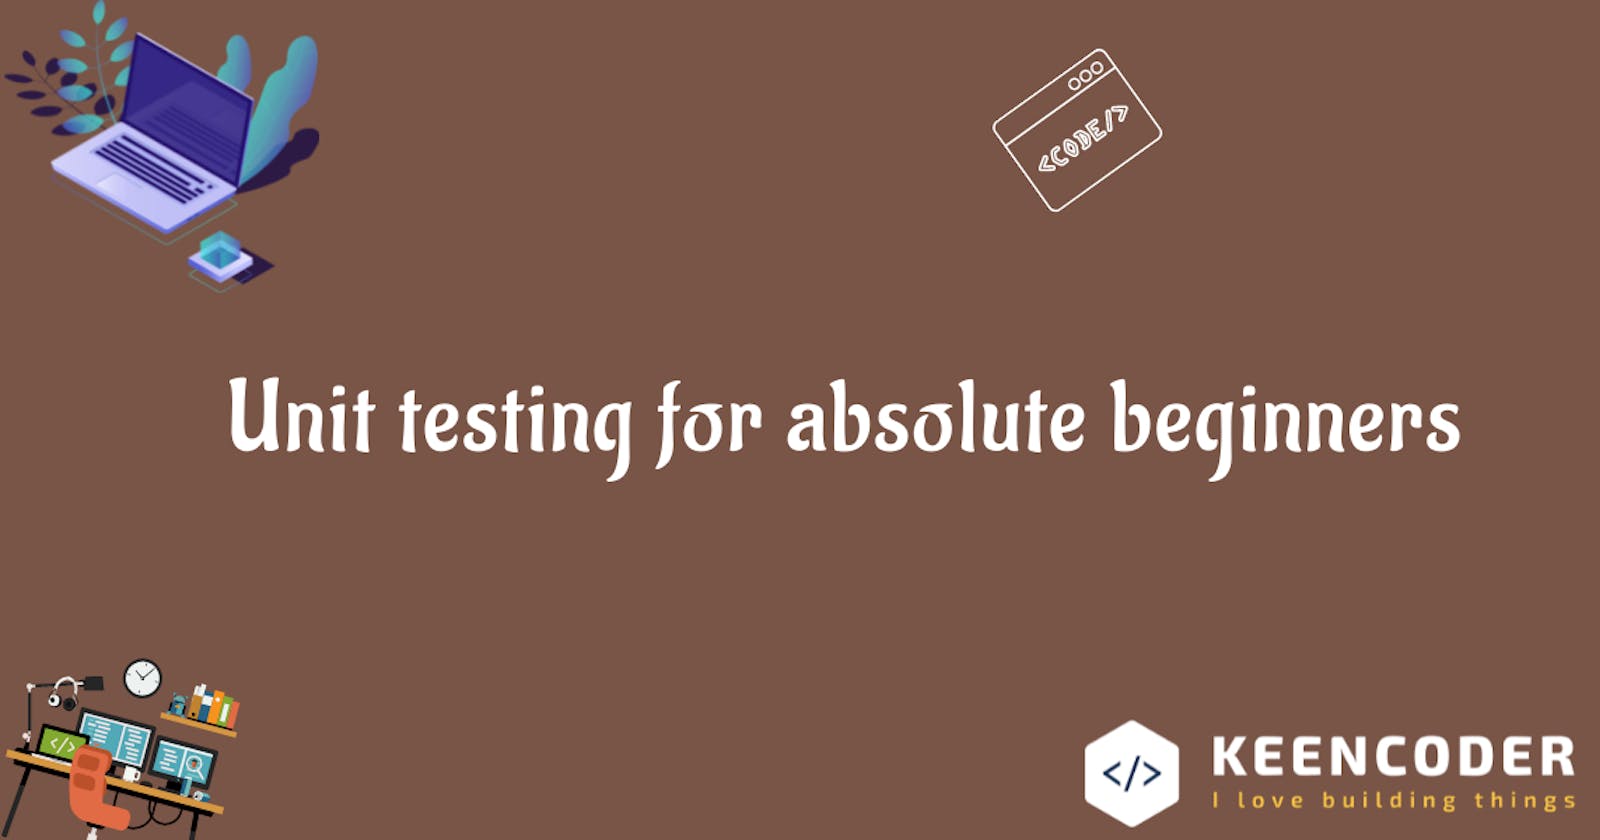 Unit testing for absolute beginners